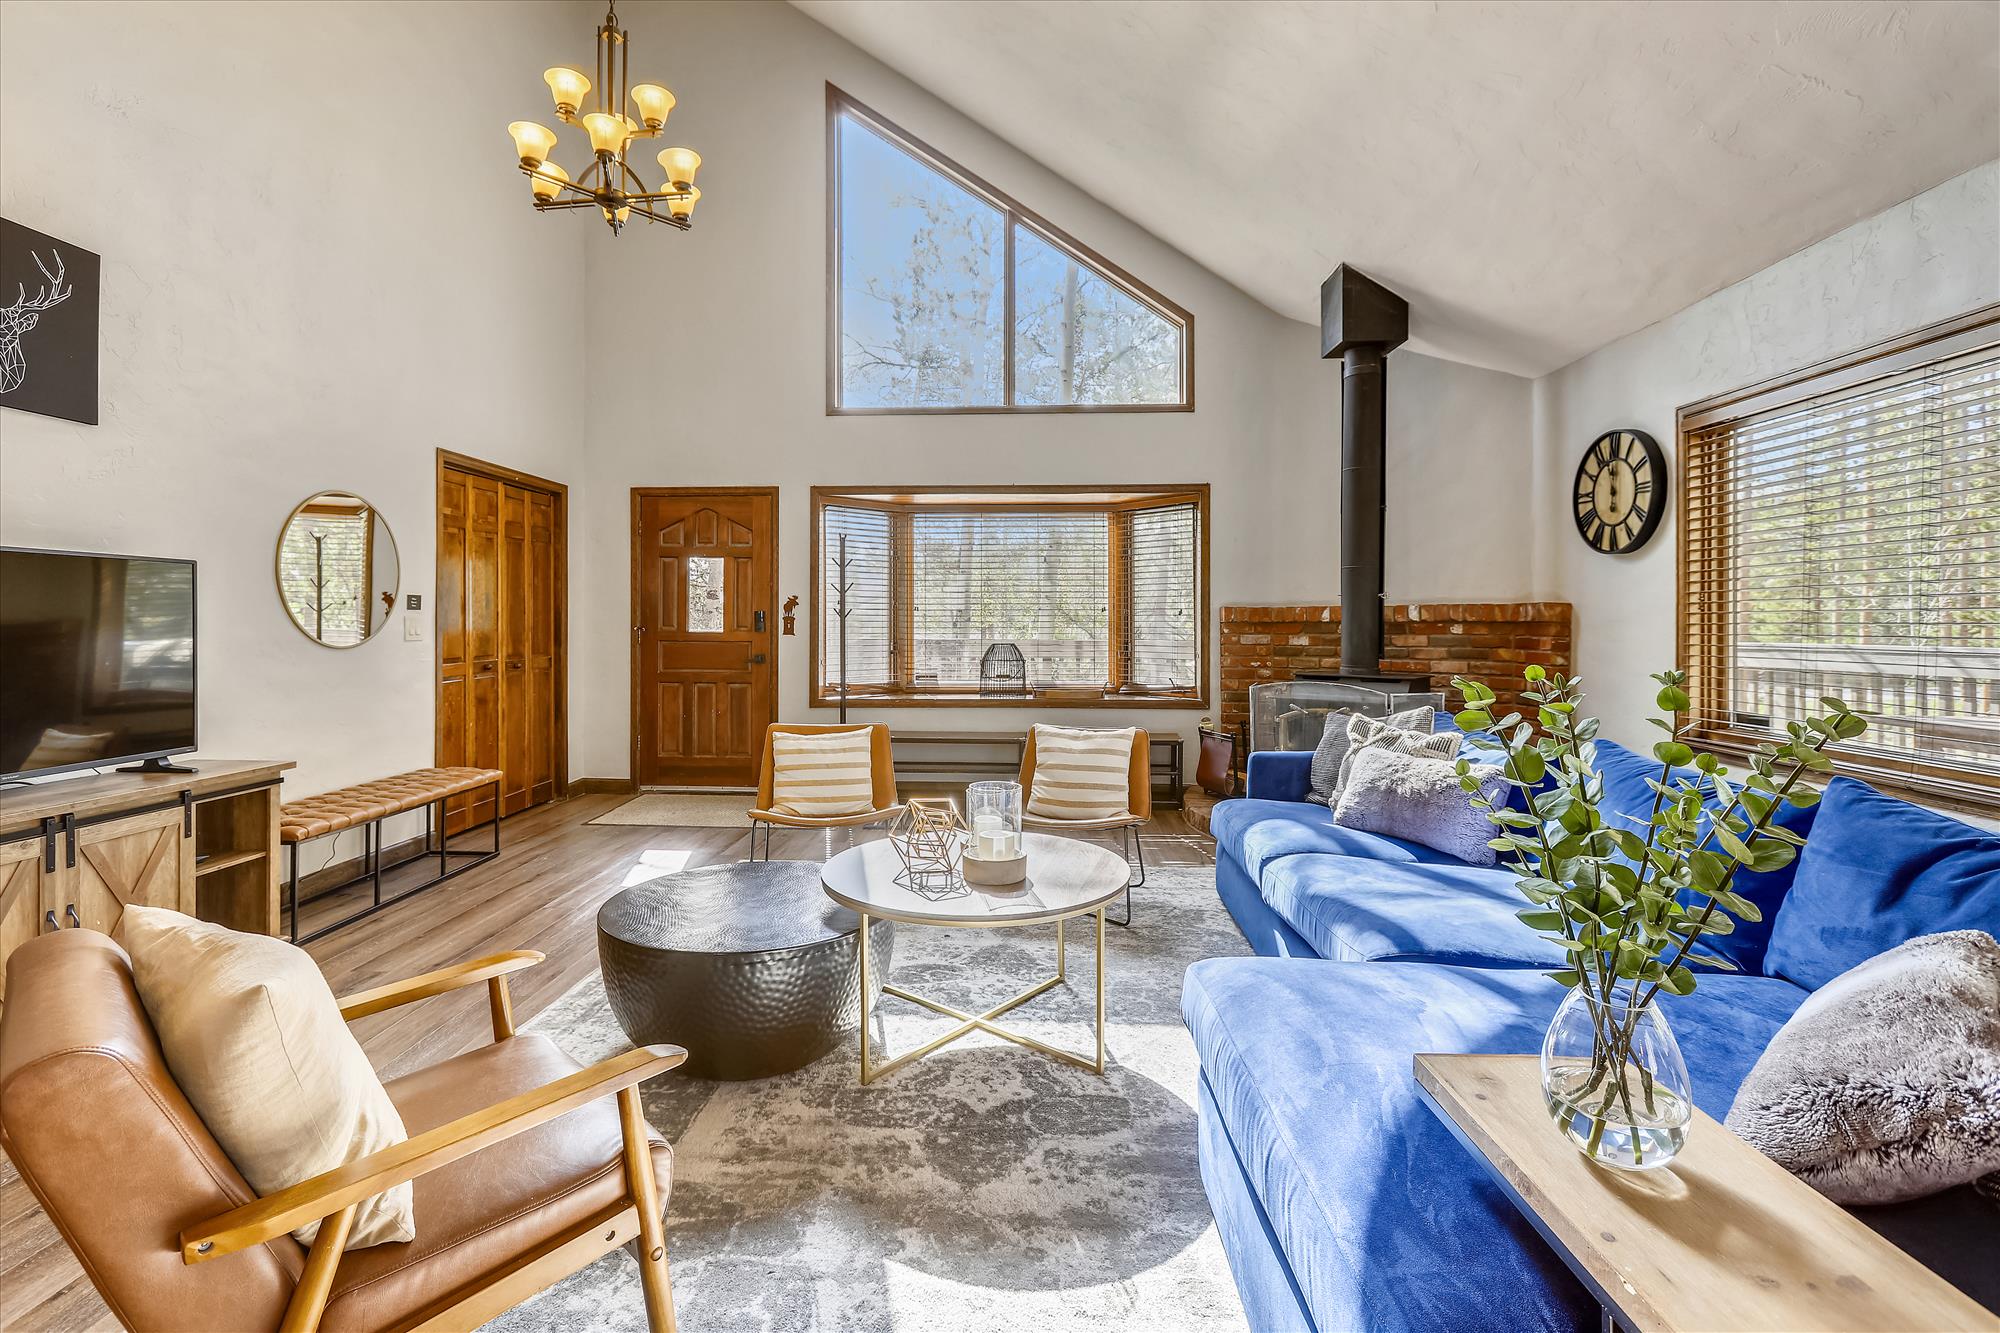 Relax by the vented gas stove or watch a movie with family and friends - Calderon De La Breck Breckenridge Vacation Rental